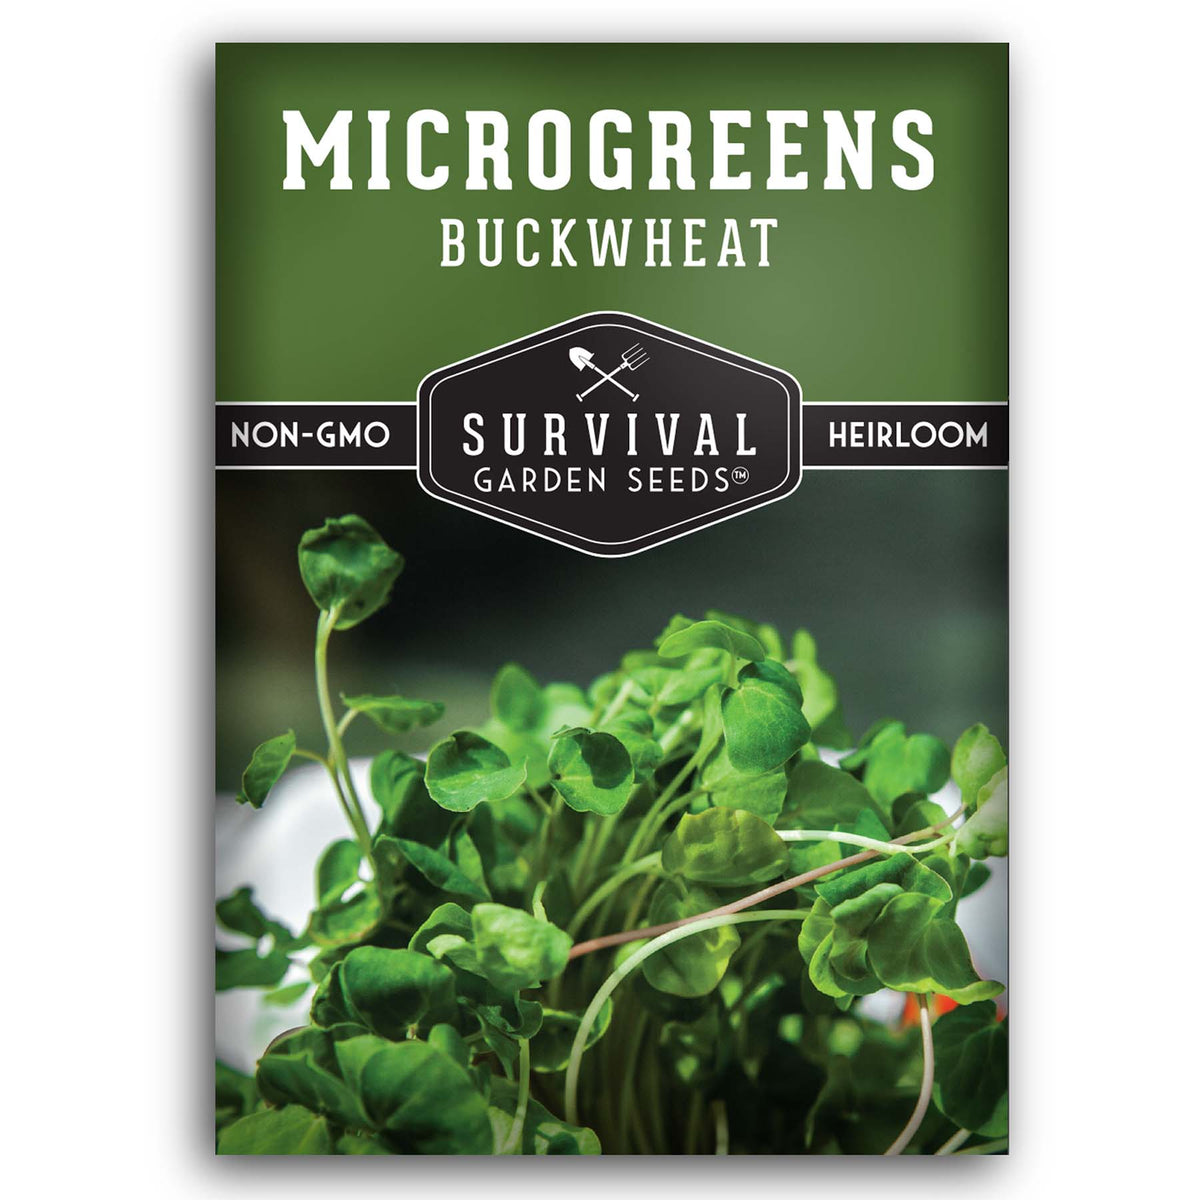 Buckwheat Microgreens seeds for sprouting